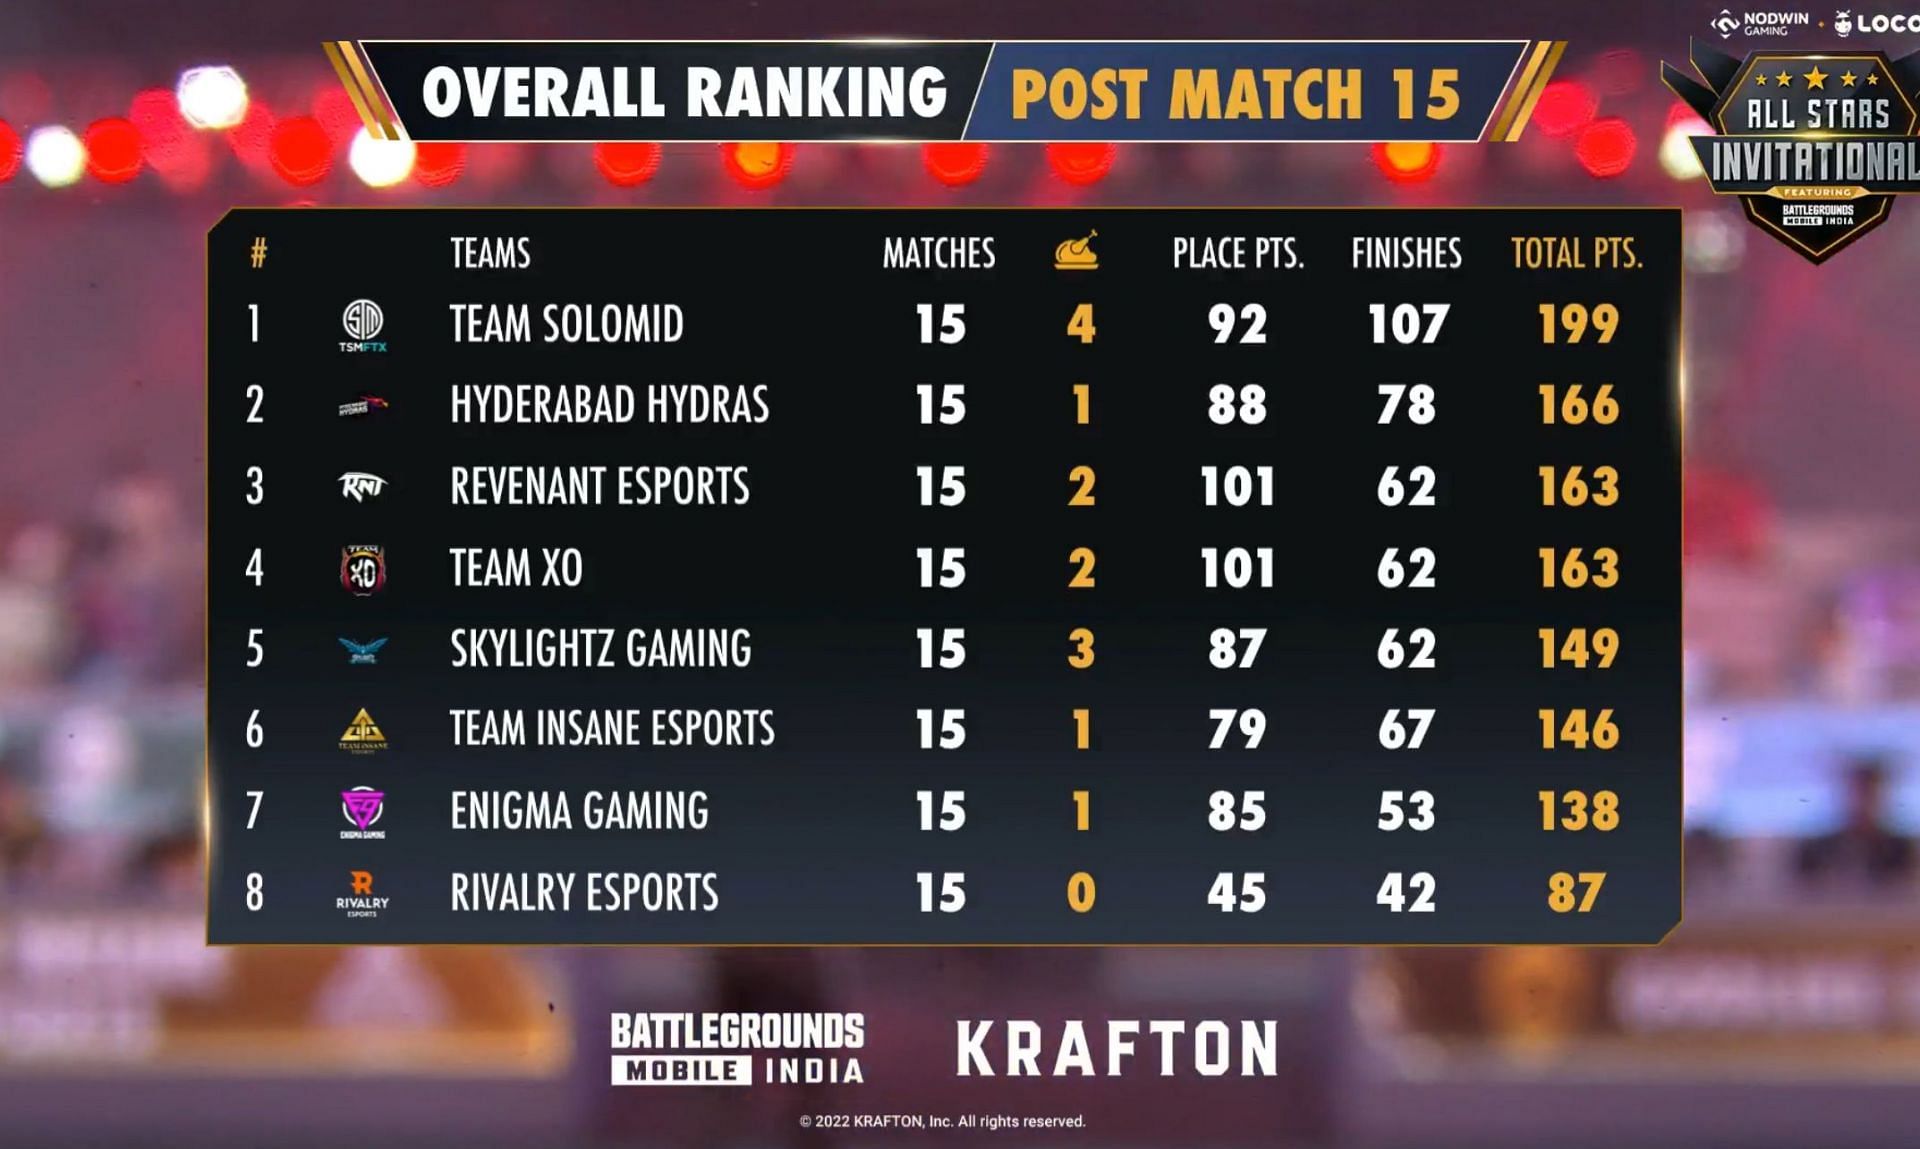 Overall standings of top 8 teams from BGMI All Stars Invitational (Image via Nodwin Gaming )